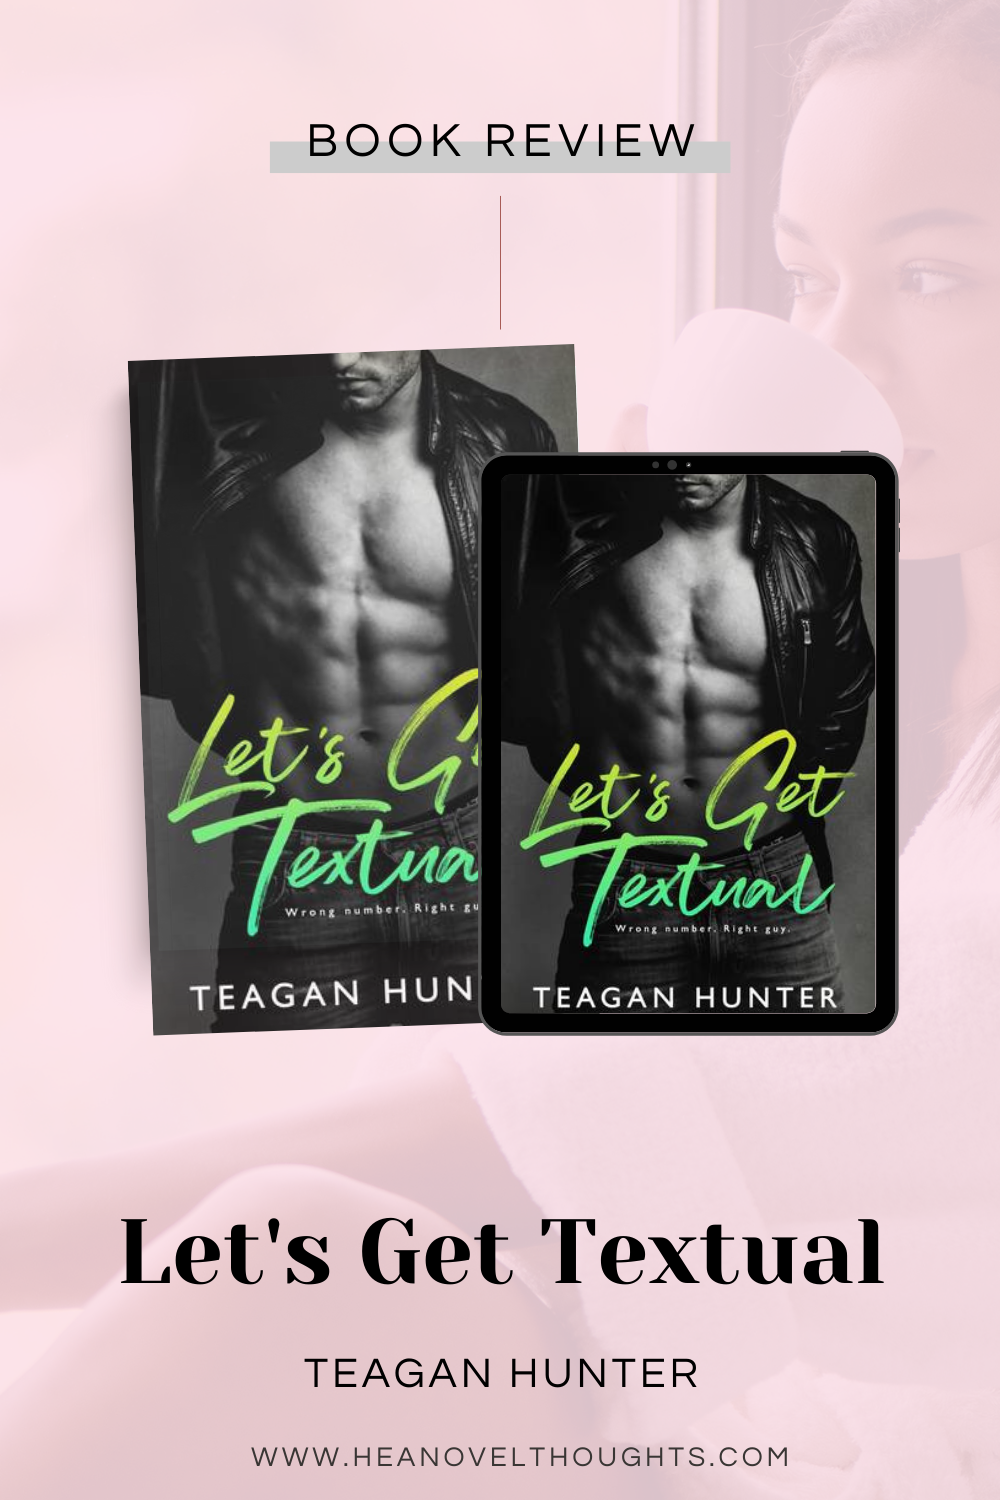 Let’s Get Textual by Teagan Hunter